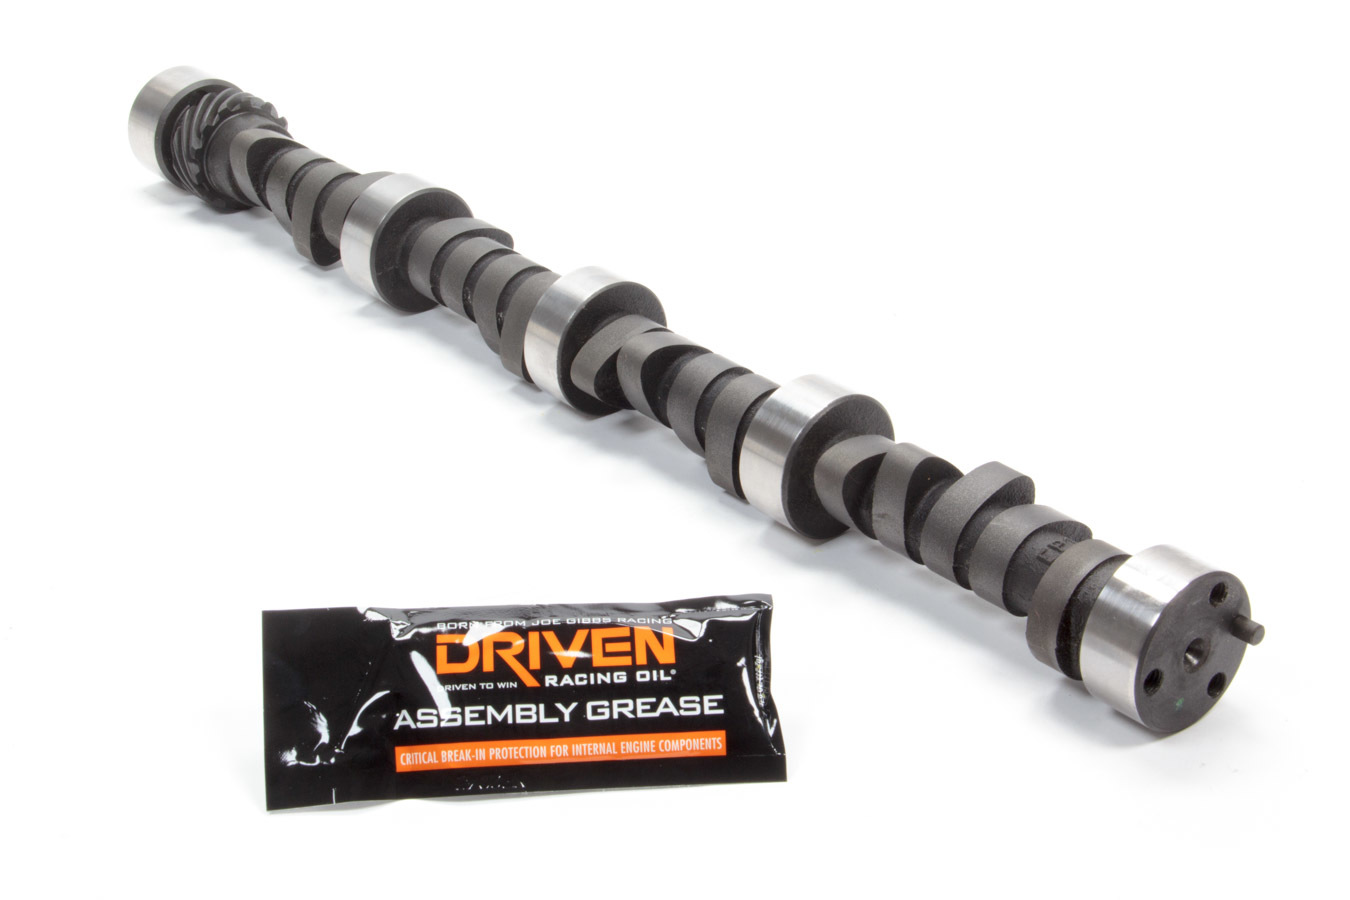 Howards Cams 110812-06 Camshaft, Mechanical Flat Tappet, Lift 0.535 / 0.540 in, Duration 276 / 280, 106 LSA, 2500 / 6500 RPM, Small Block Chevy, Each